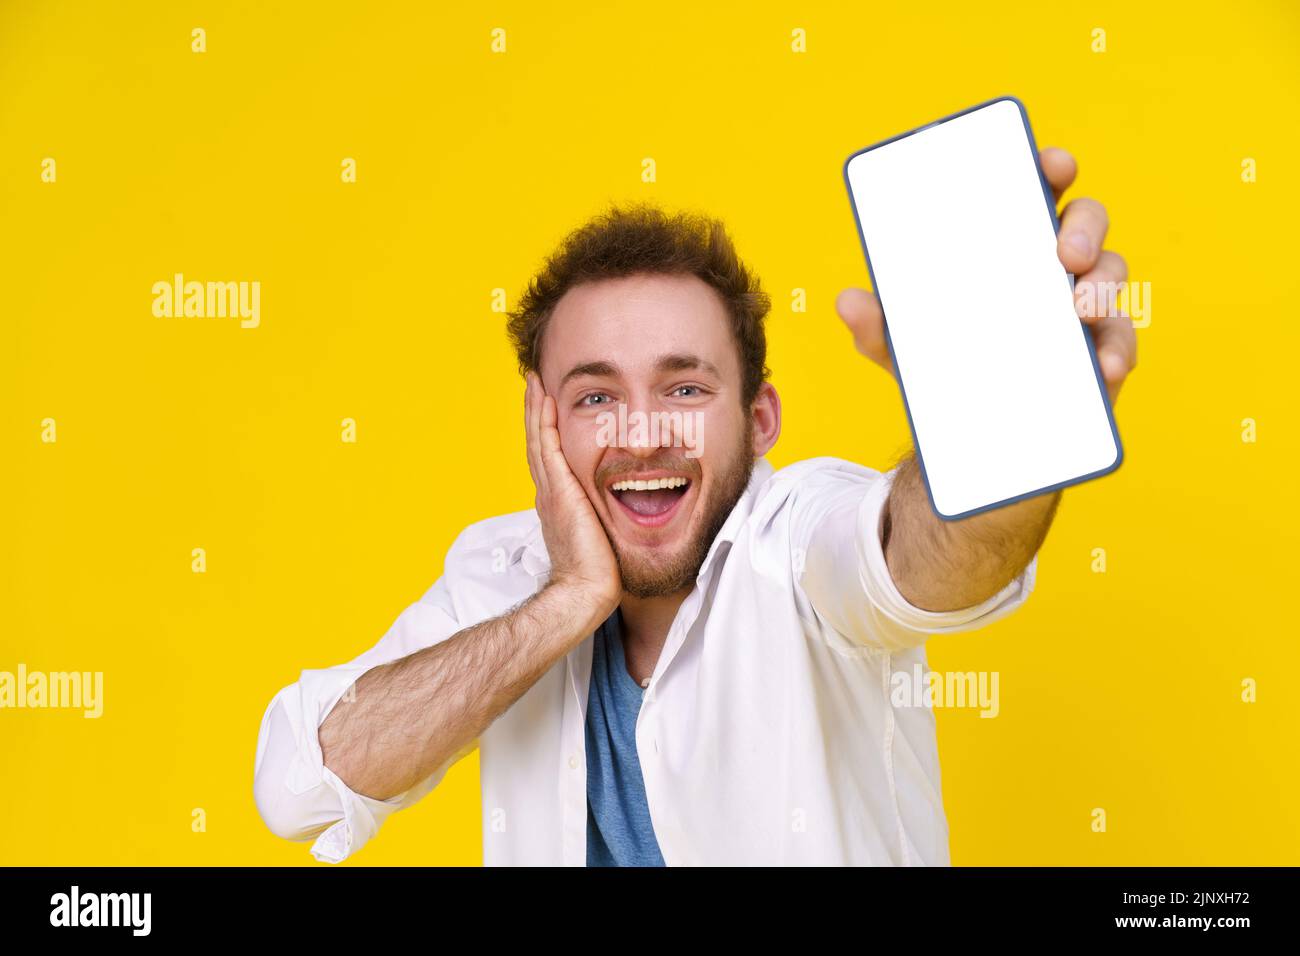 Great offer. Young happy man holding smartphone showing a white empty screen and exciting to win isolated over yellow background, celebrating success. Product placement. Mobile App Advertisement.  Stock Photo